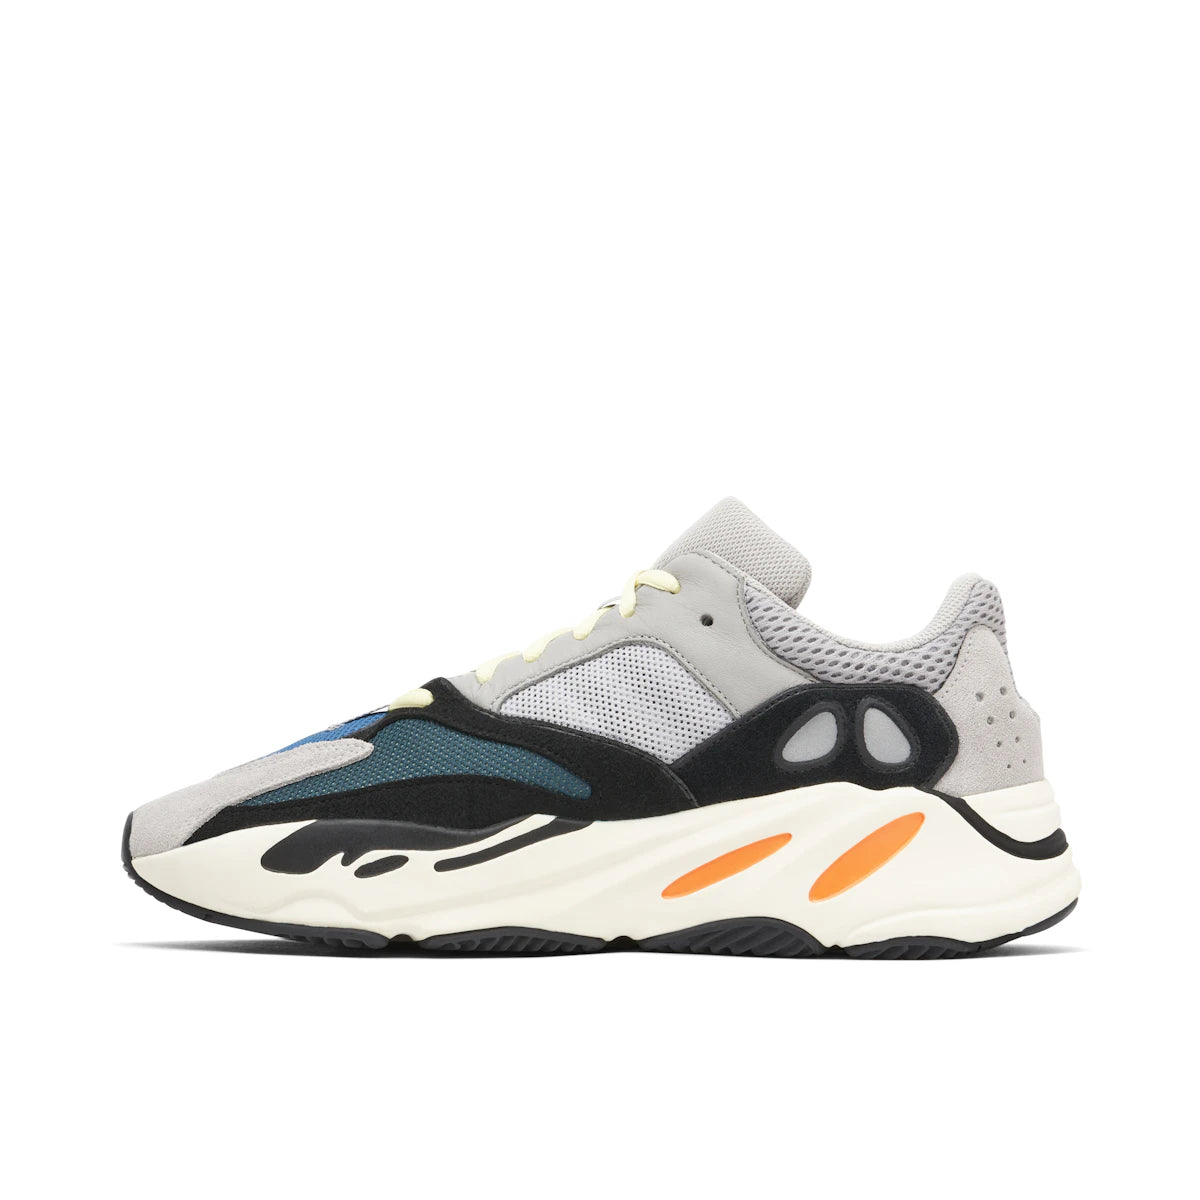 Adidas Yeezy Boost 700 Wave Runner by Yeezy from £450.00